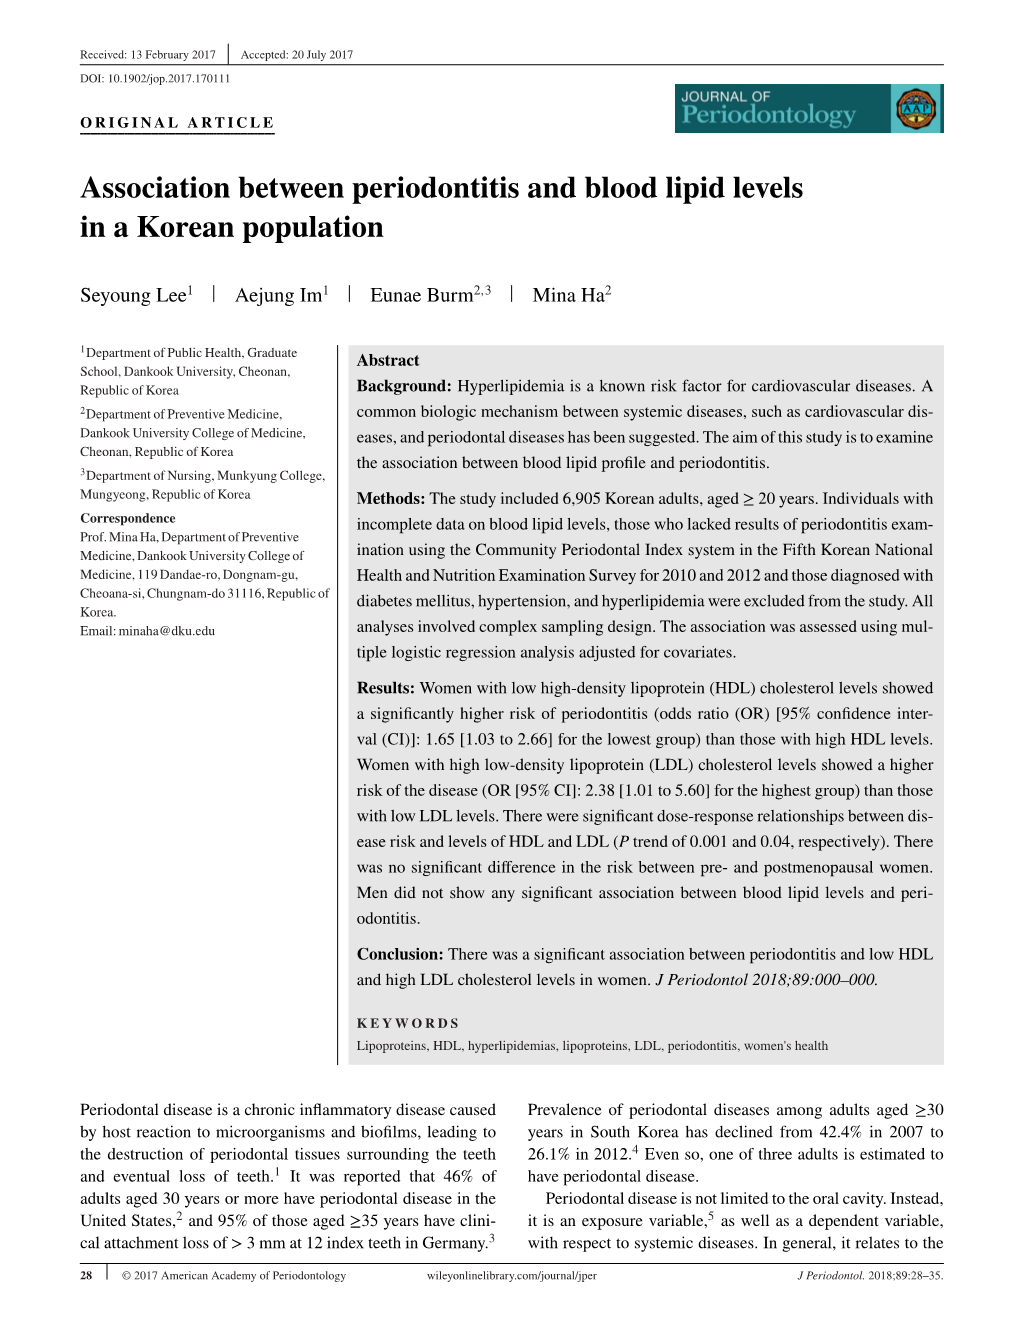 Association Between Periodontitis and Blood Lipid Levels in a Korean Population